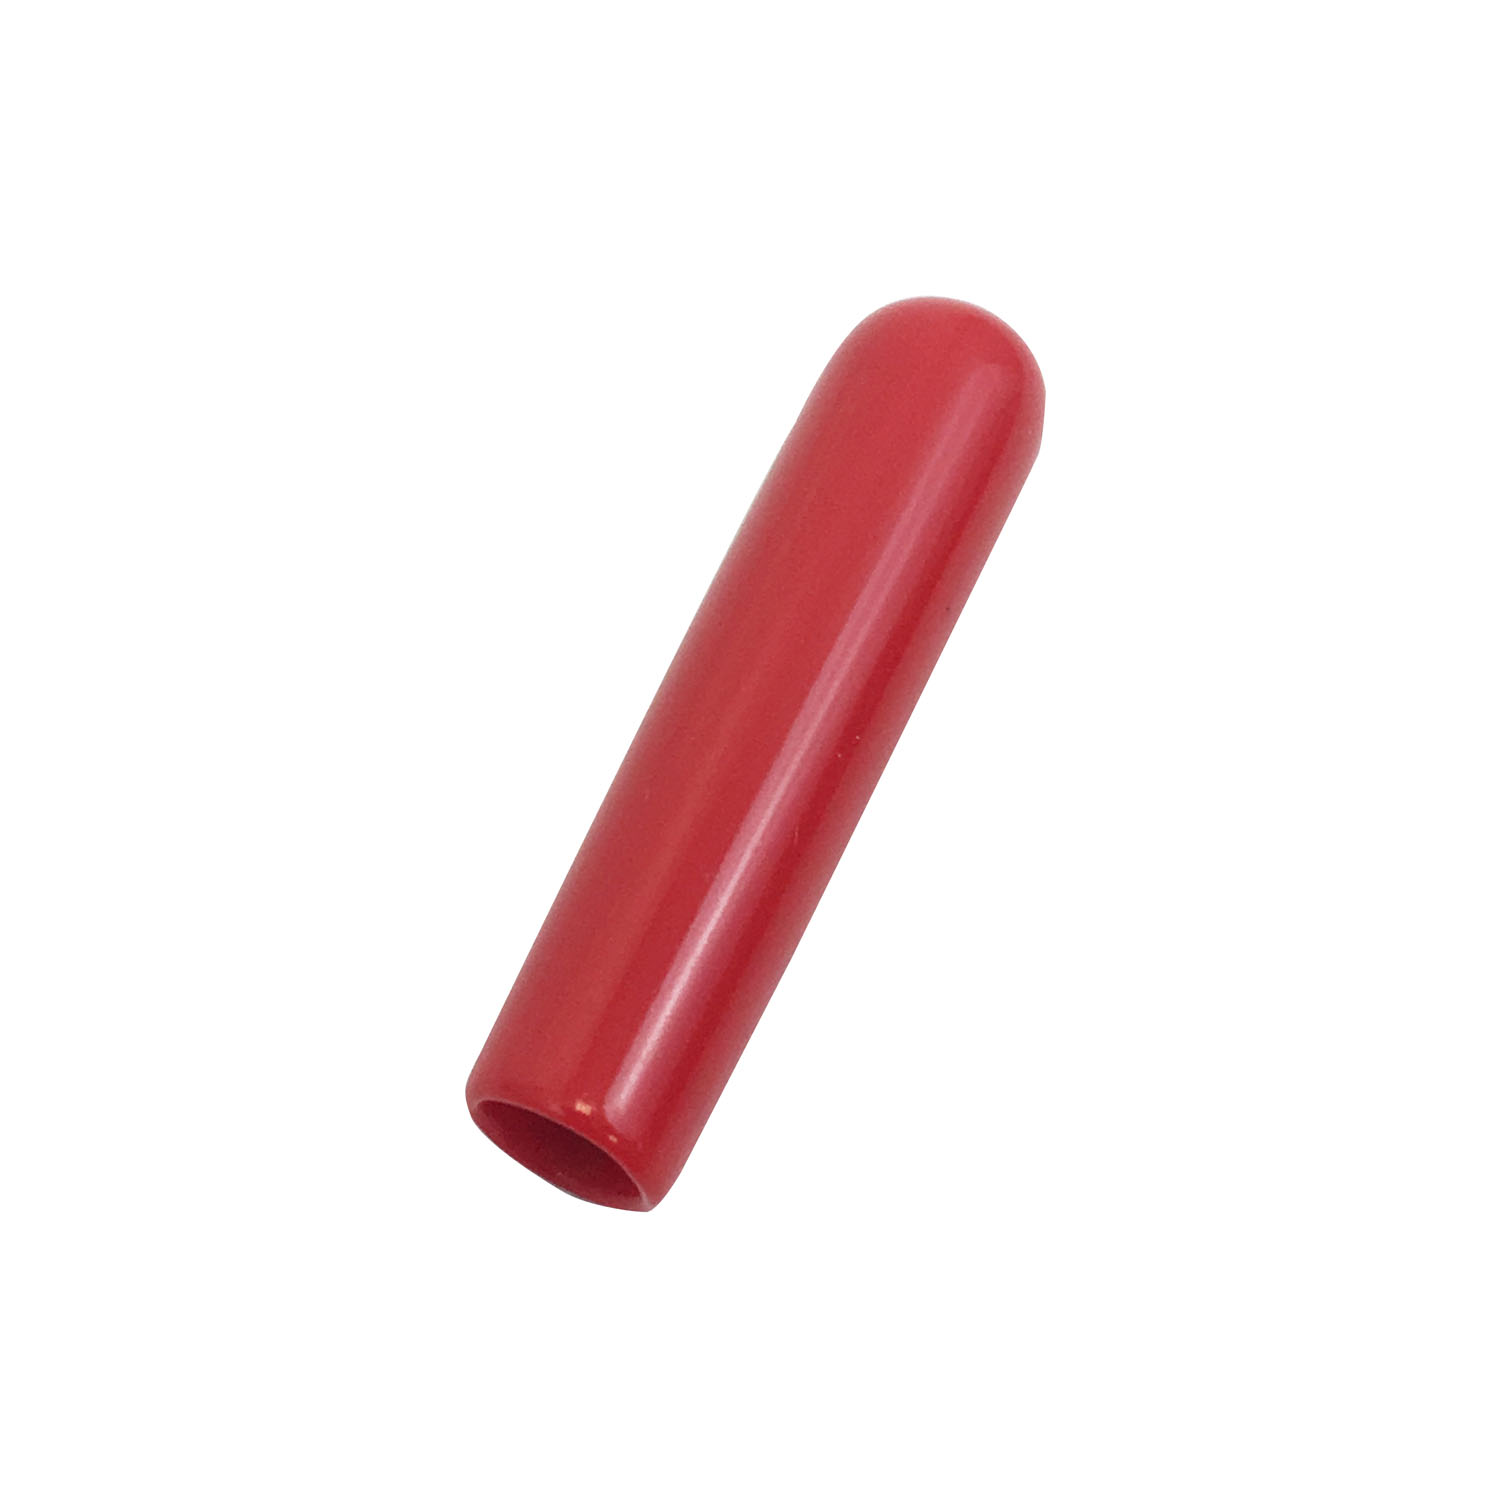 Procomm - FR96CAP 1-3/4" Tapered Red Replacement Cap For The Fr96 Antenna